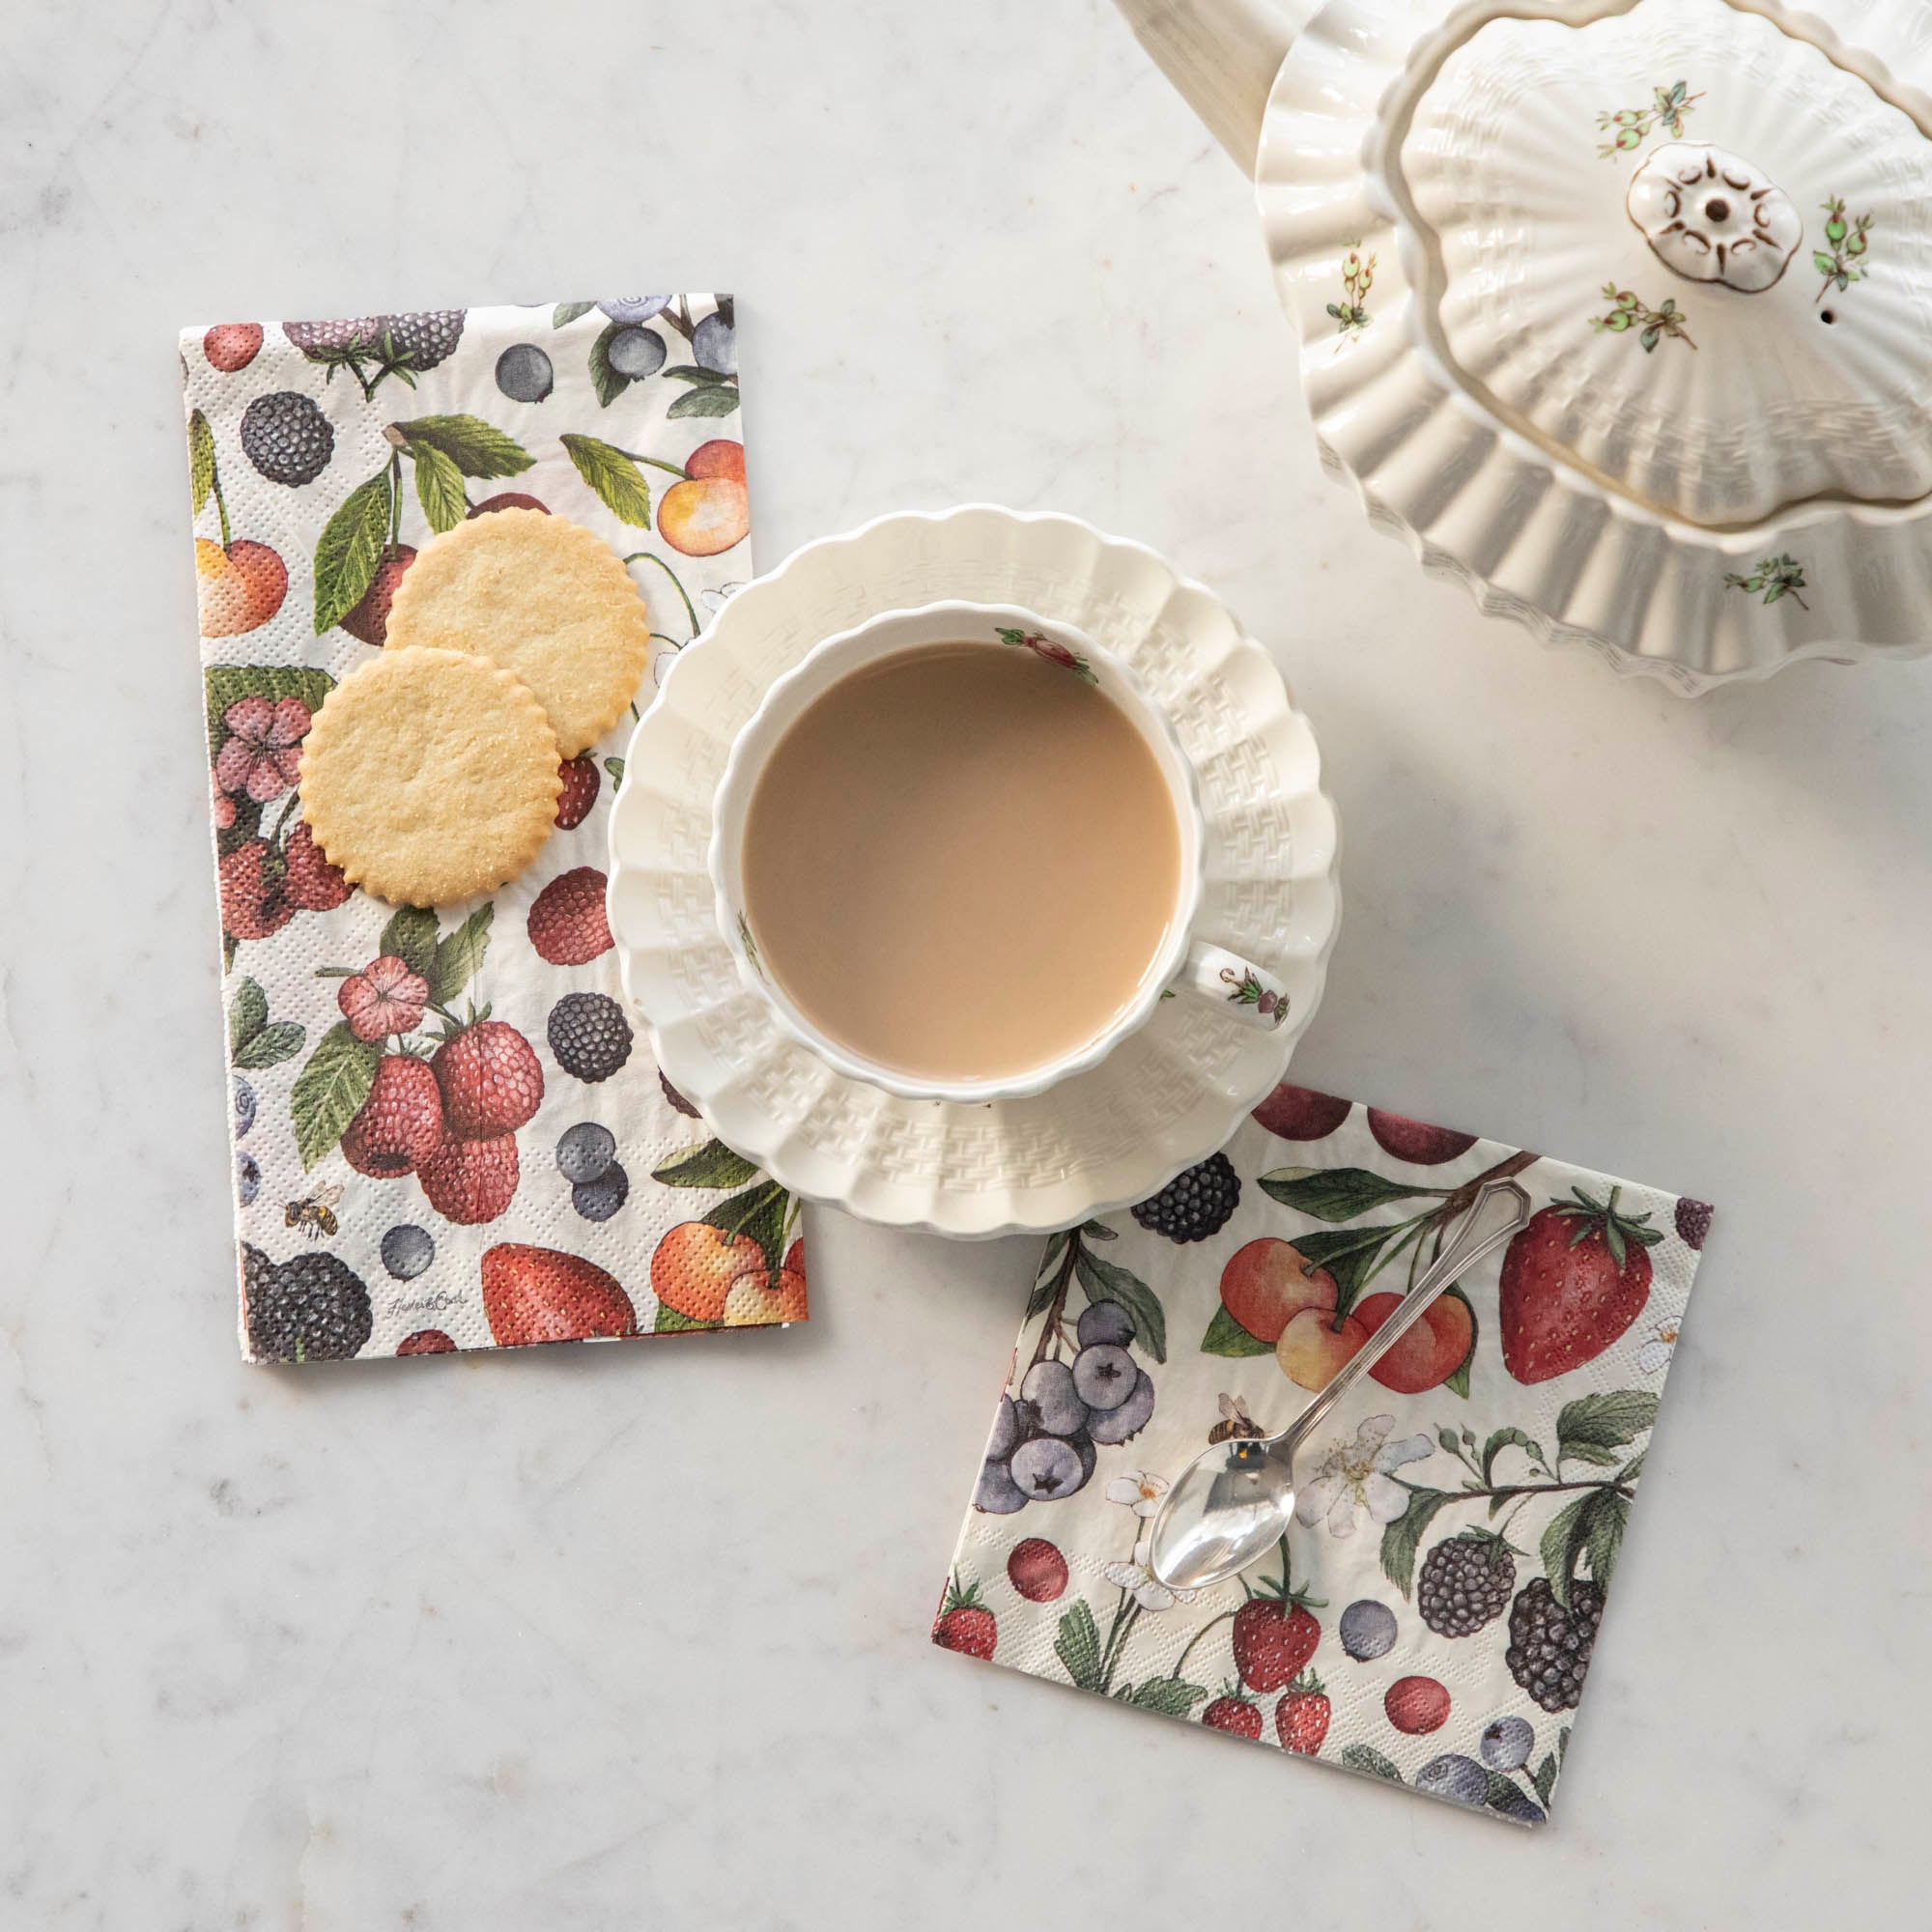 A tea cup and cookies on Wild Berry Napkins by Hester &amp; Cook.